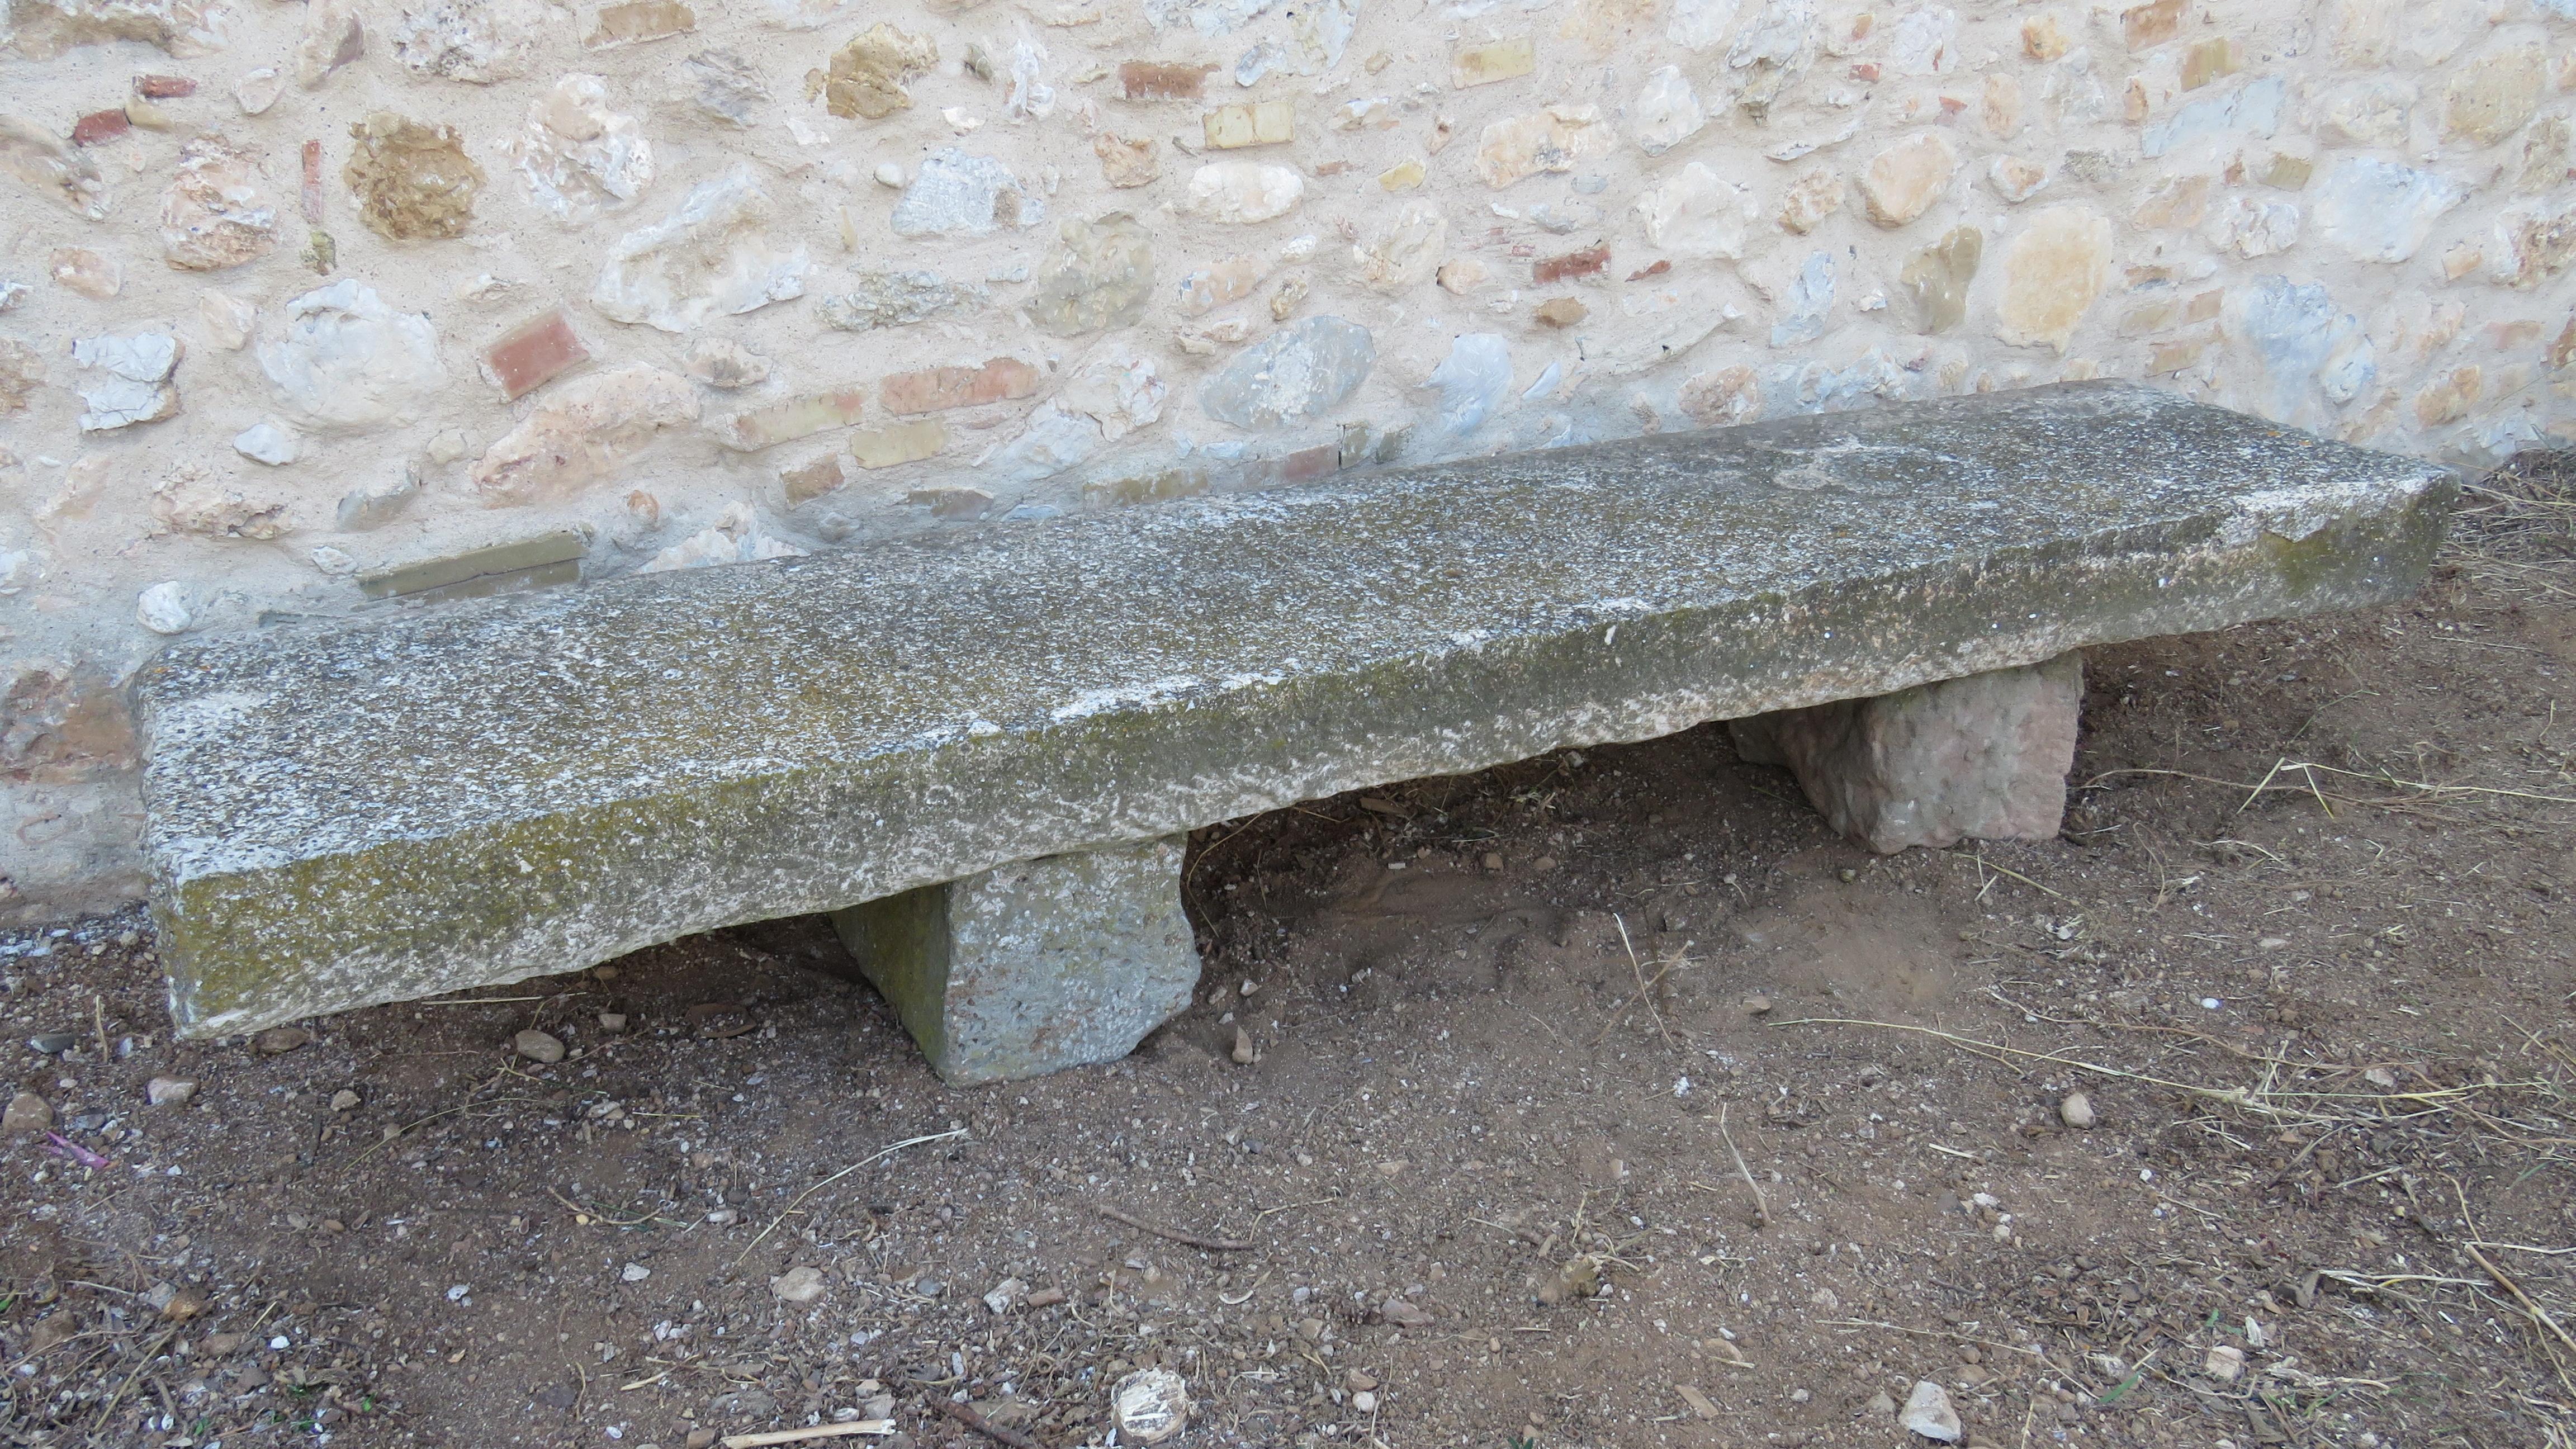 Of massive rectangular roughly hewn form raised on rectangular section plinths.